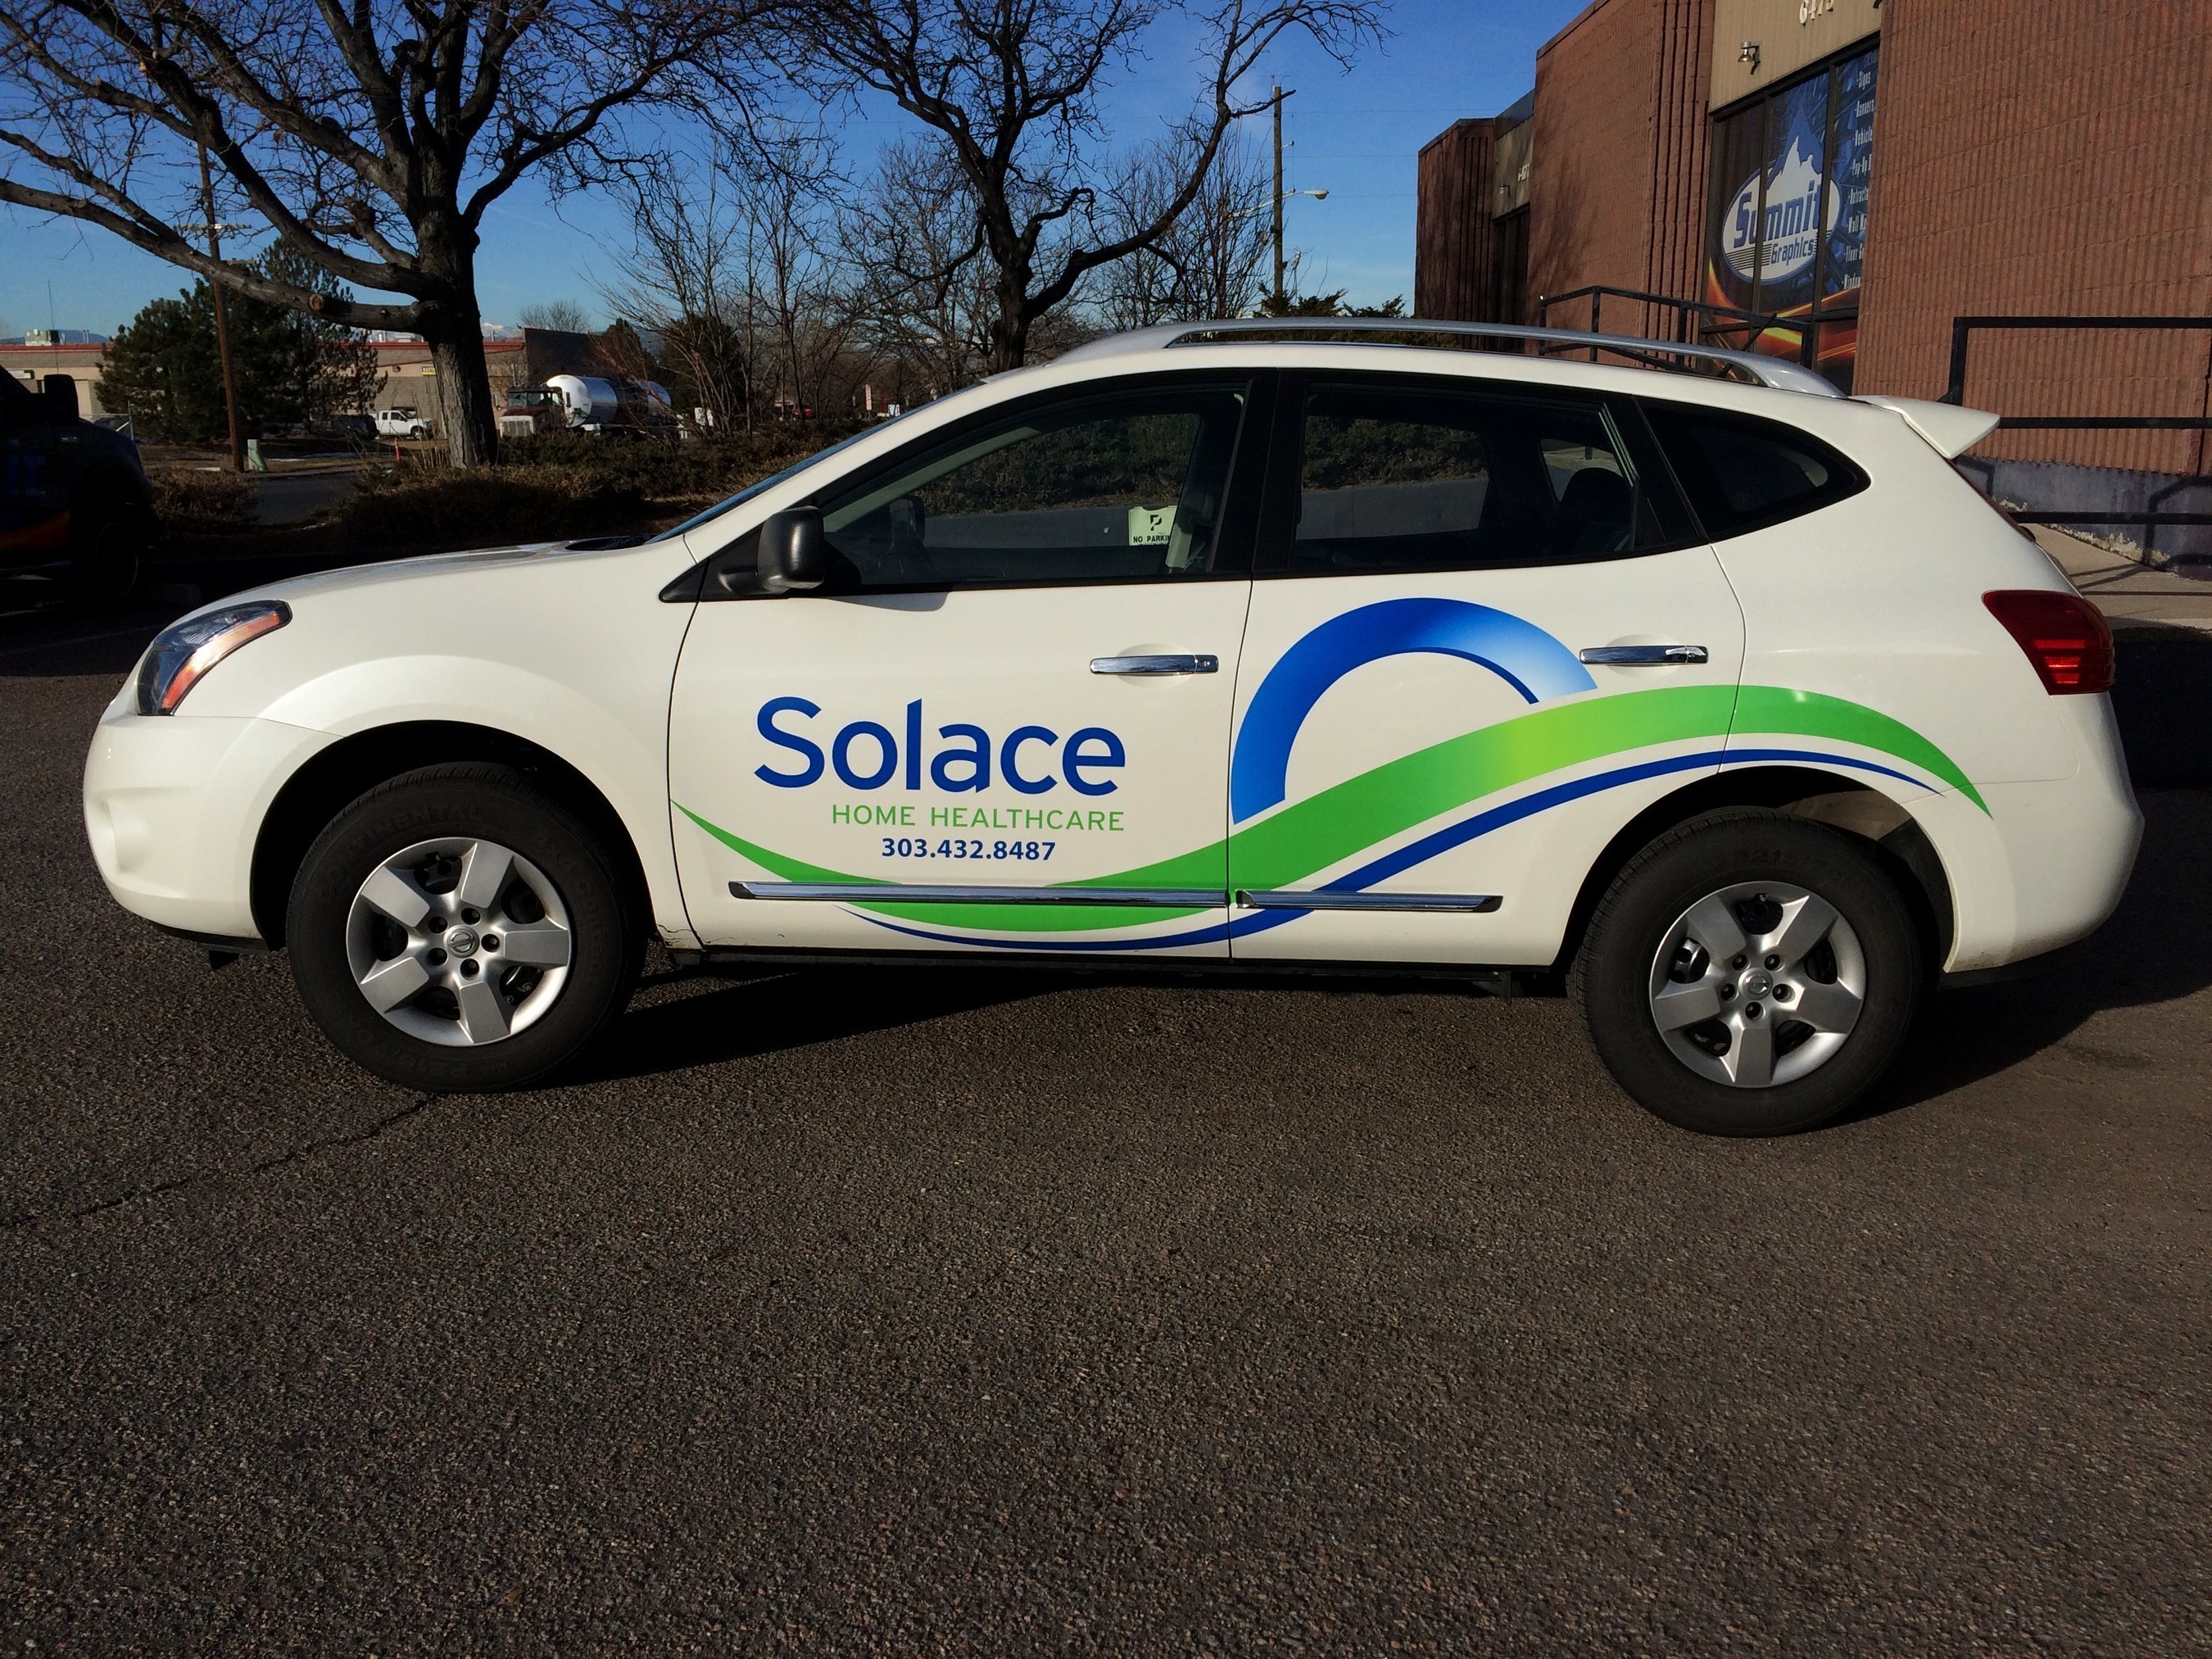 Solace Home Healthcare employees will receive a new Nissan Rogue as part of the organization's partnership with Enterprise Fleet Management.